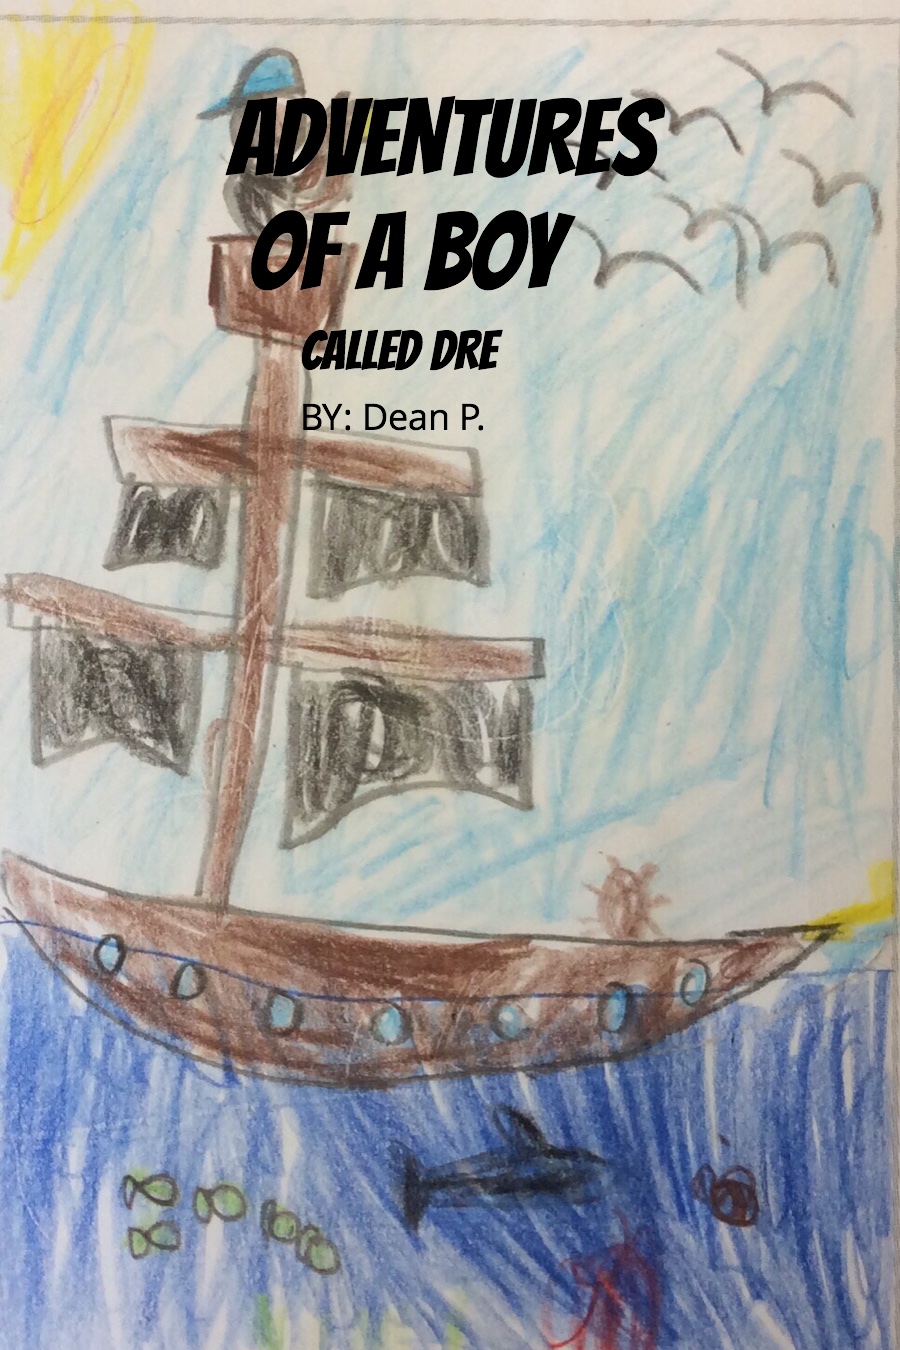 Adventures Of A Boy Called Dre by Dean P